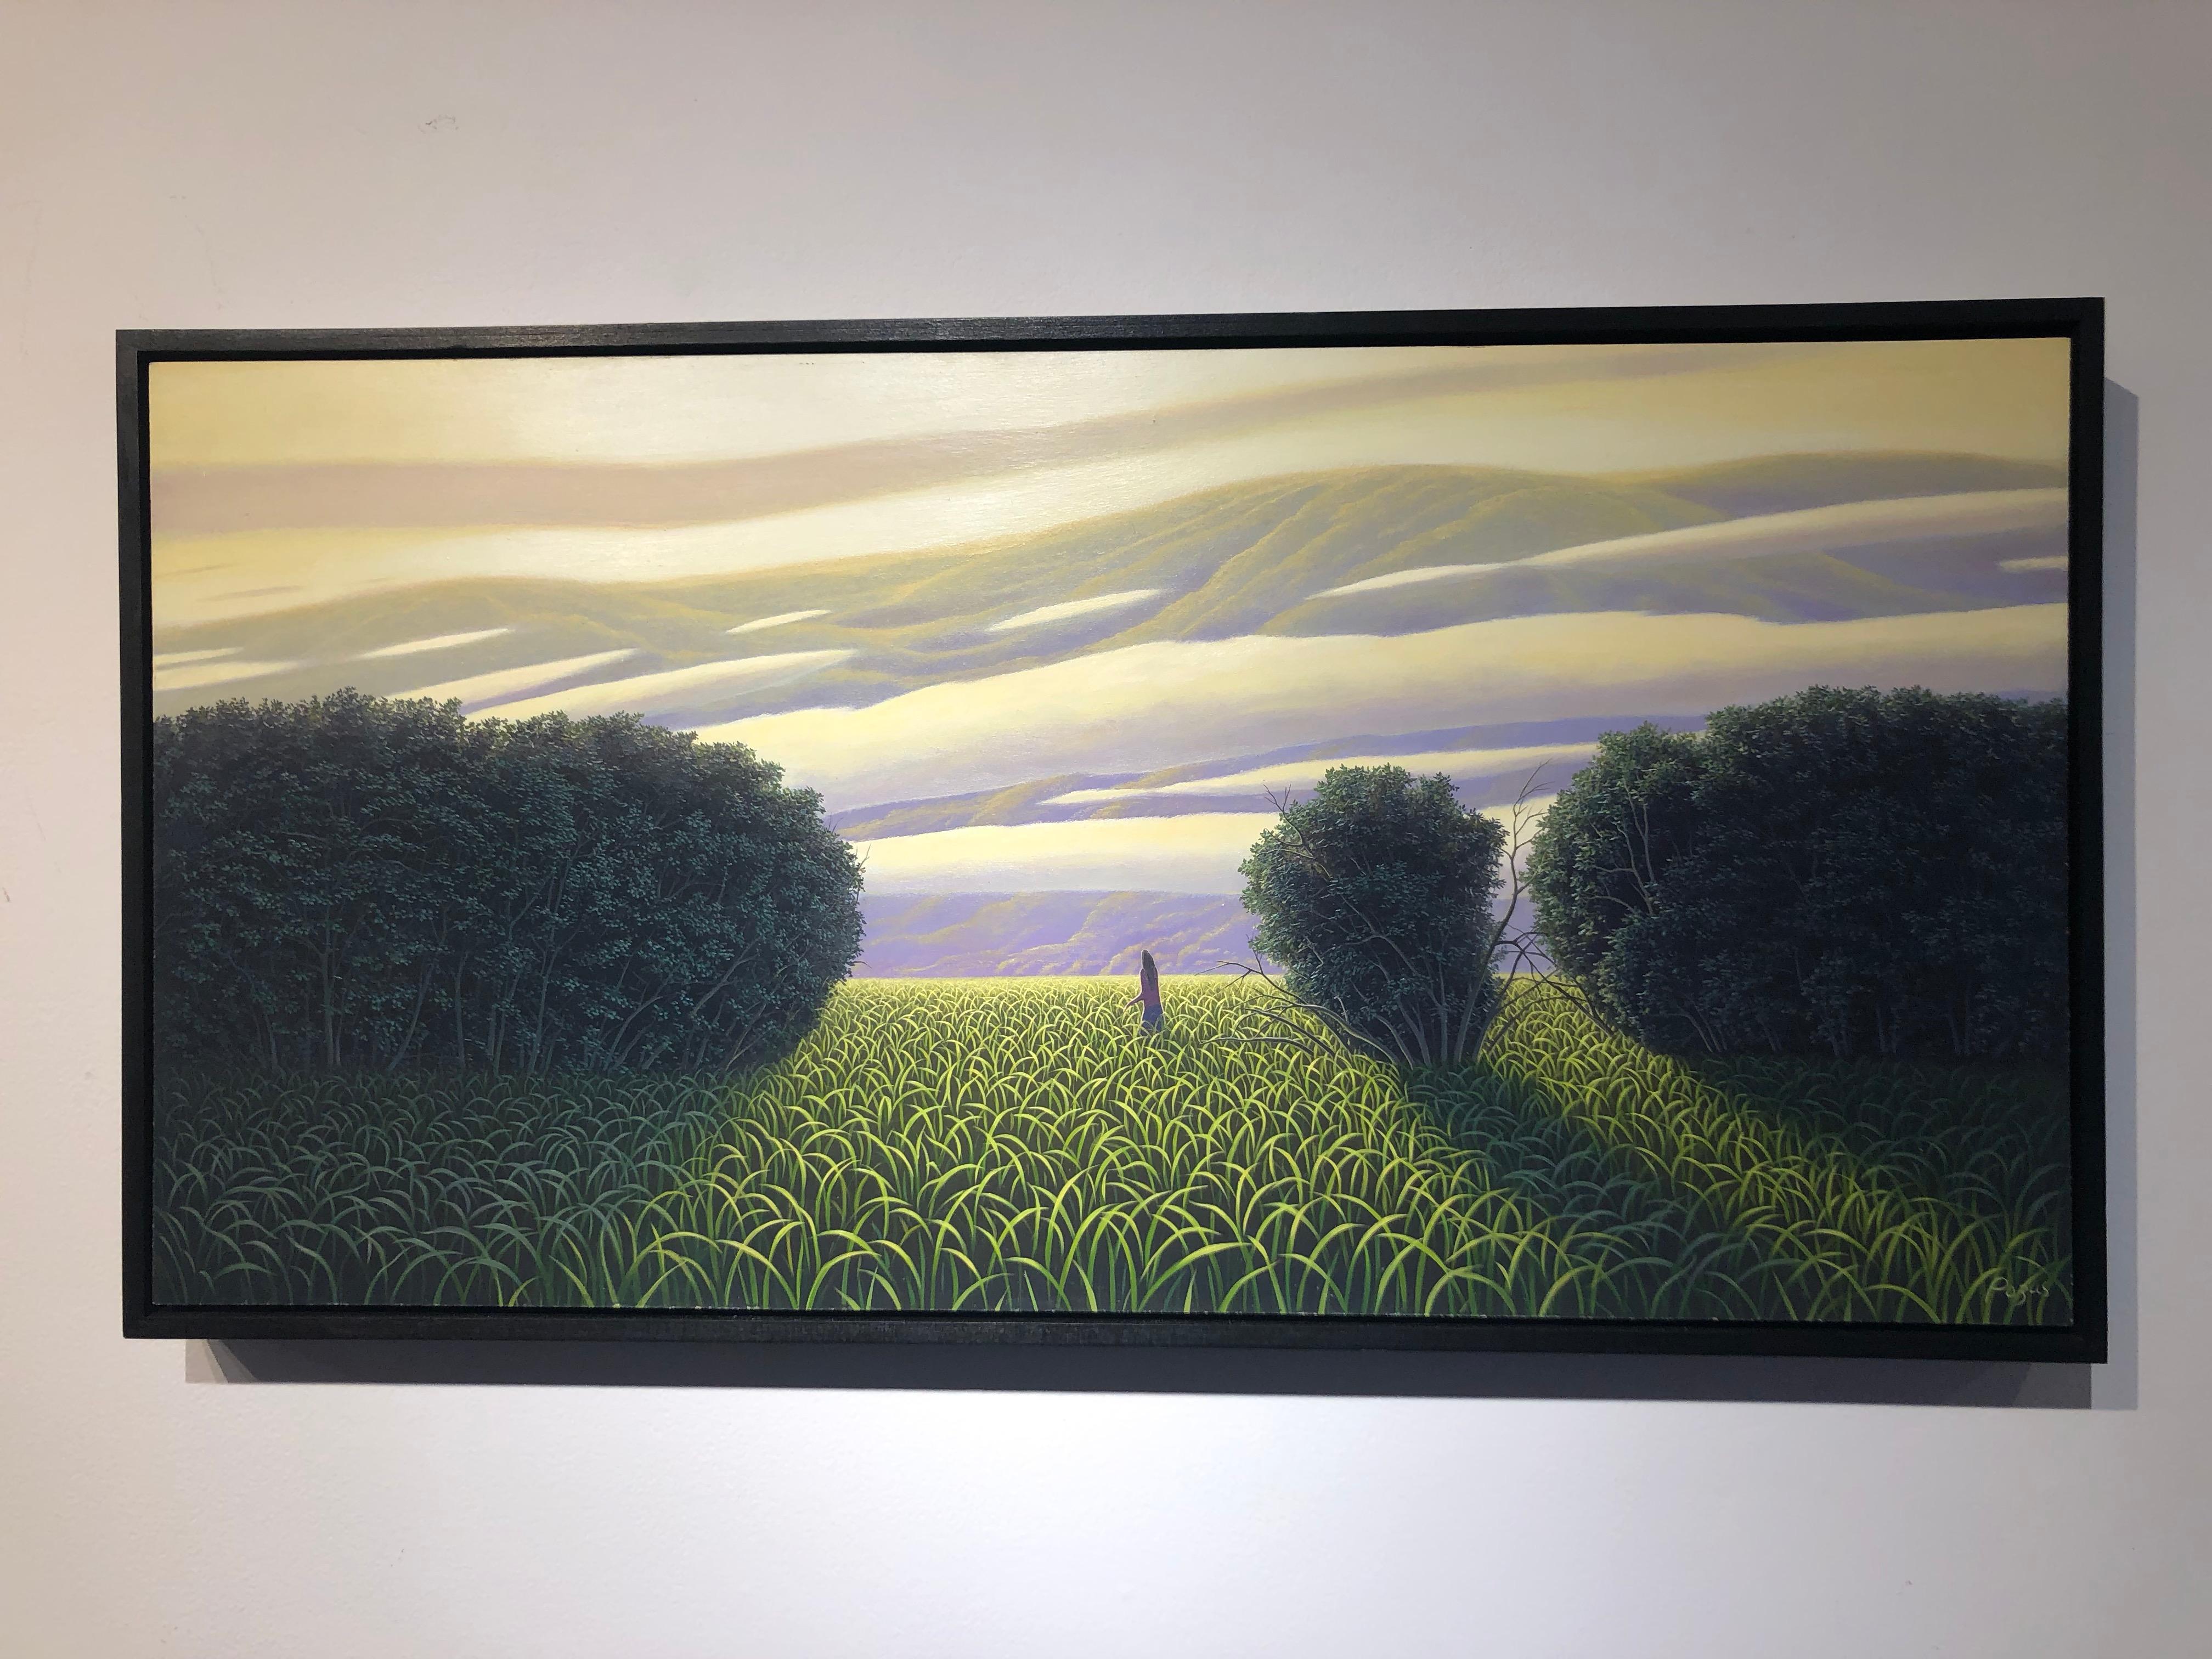 The Perfect Evening - Original Oil Painting of Figure in a Surreal Landscape - Black Figurative Painting by René Monzón Relova “Pozas”